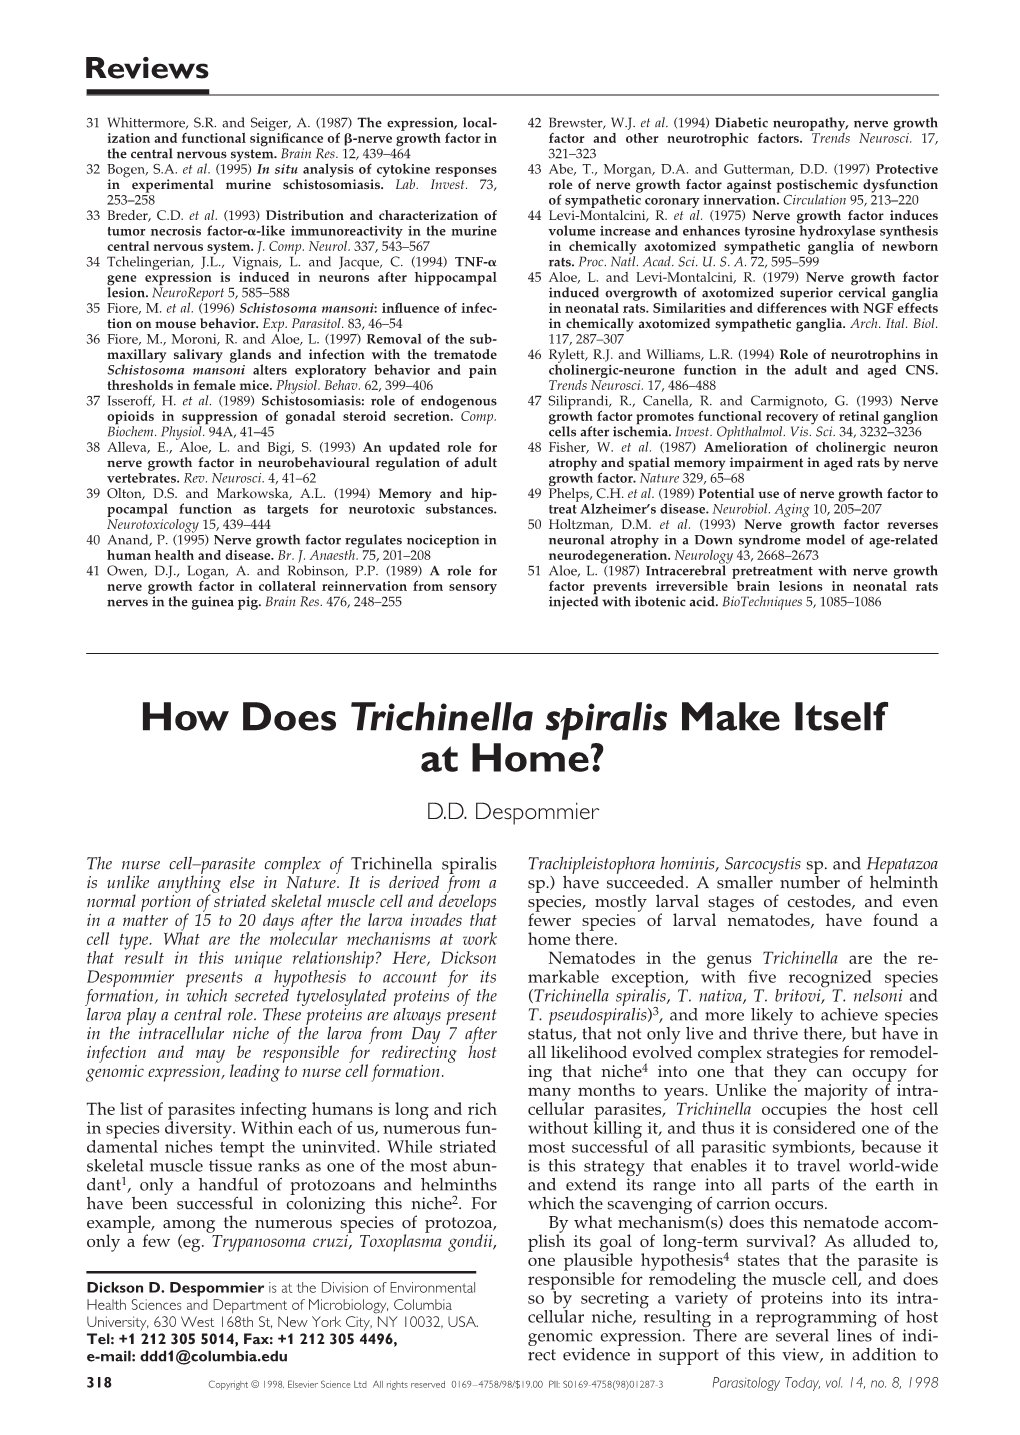 How Does Trichinella Spiralis Make Itself at Home? D.D